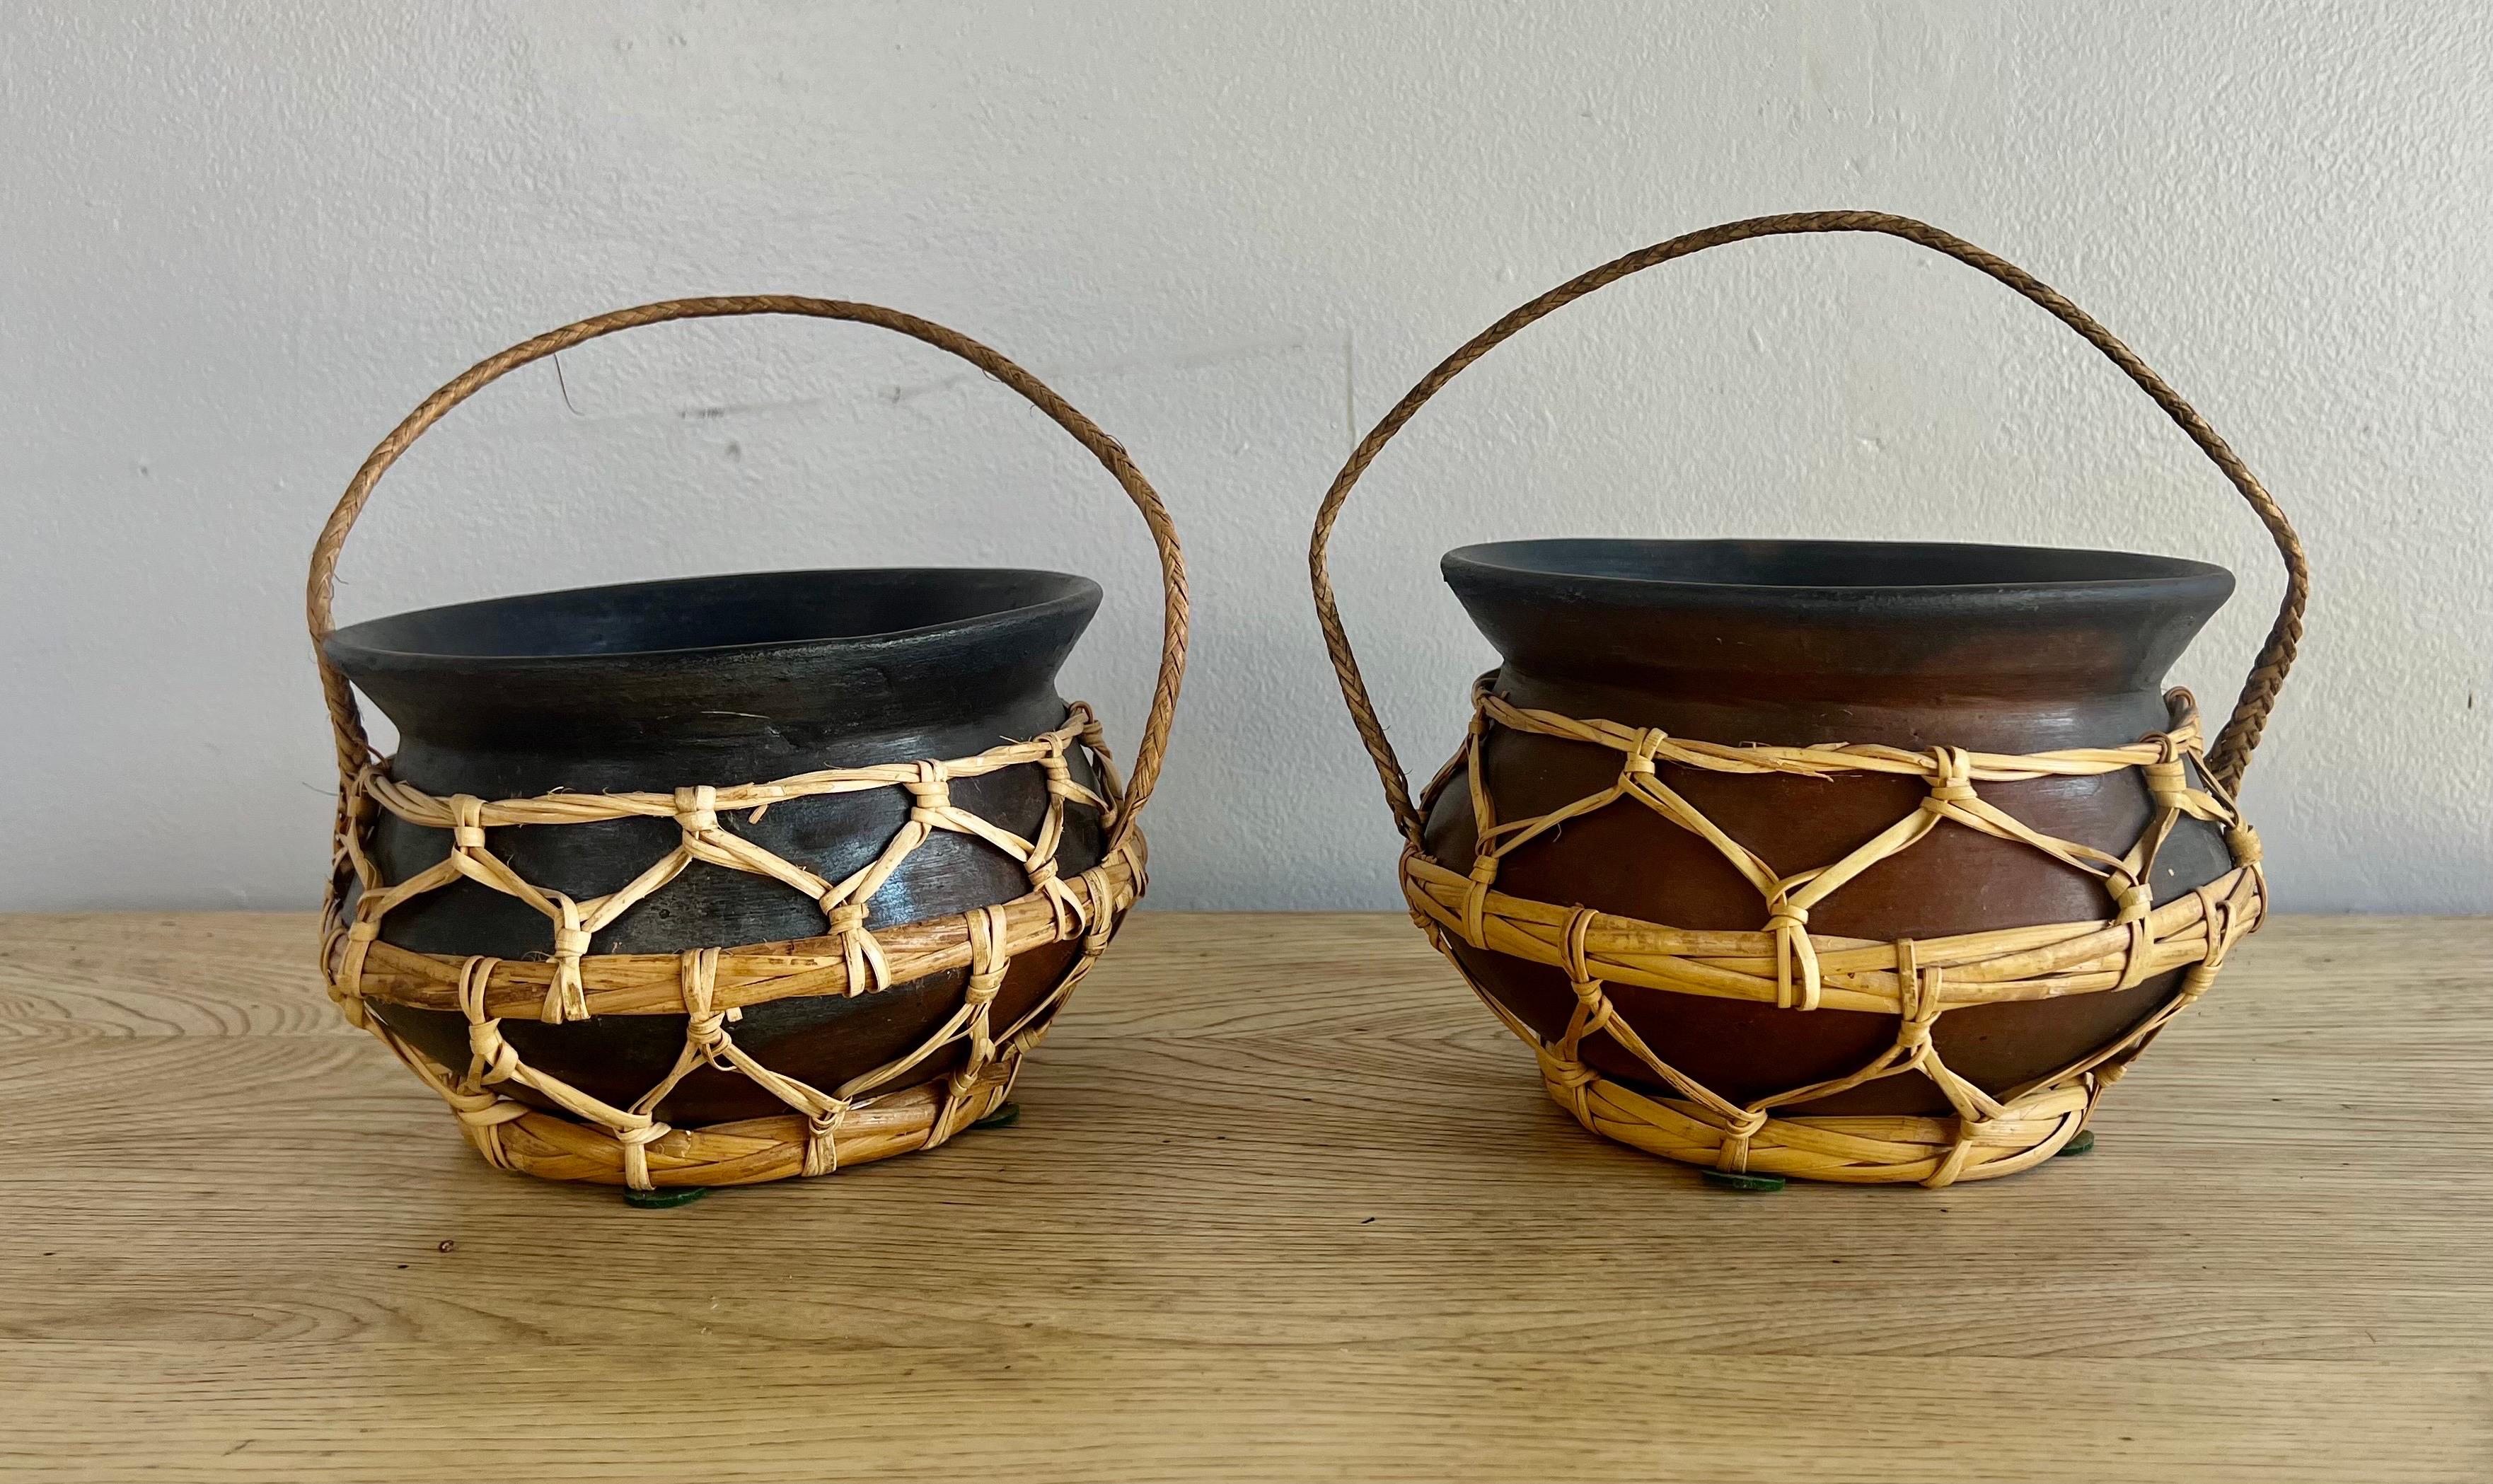 Pair of rare antique Nupe pottery cooking vessels made by Nigerian artisan.  Both have rattan decoration and handles.